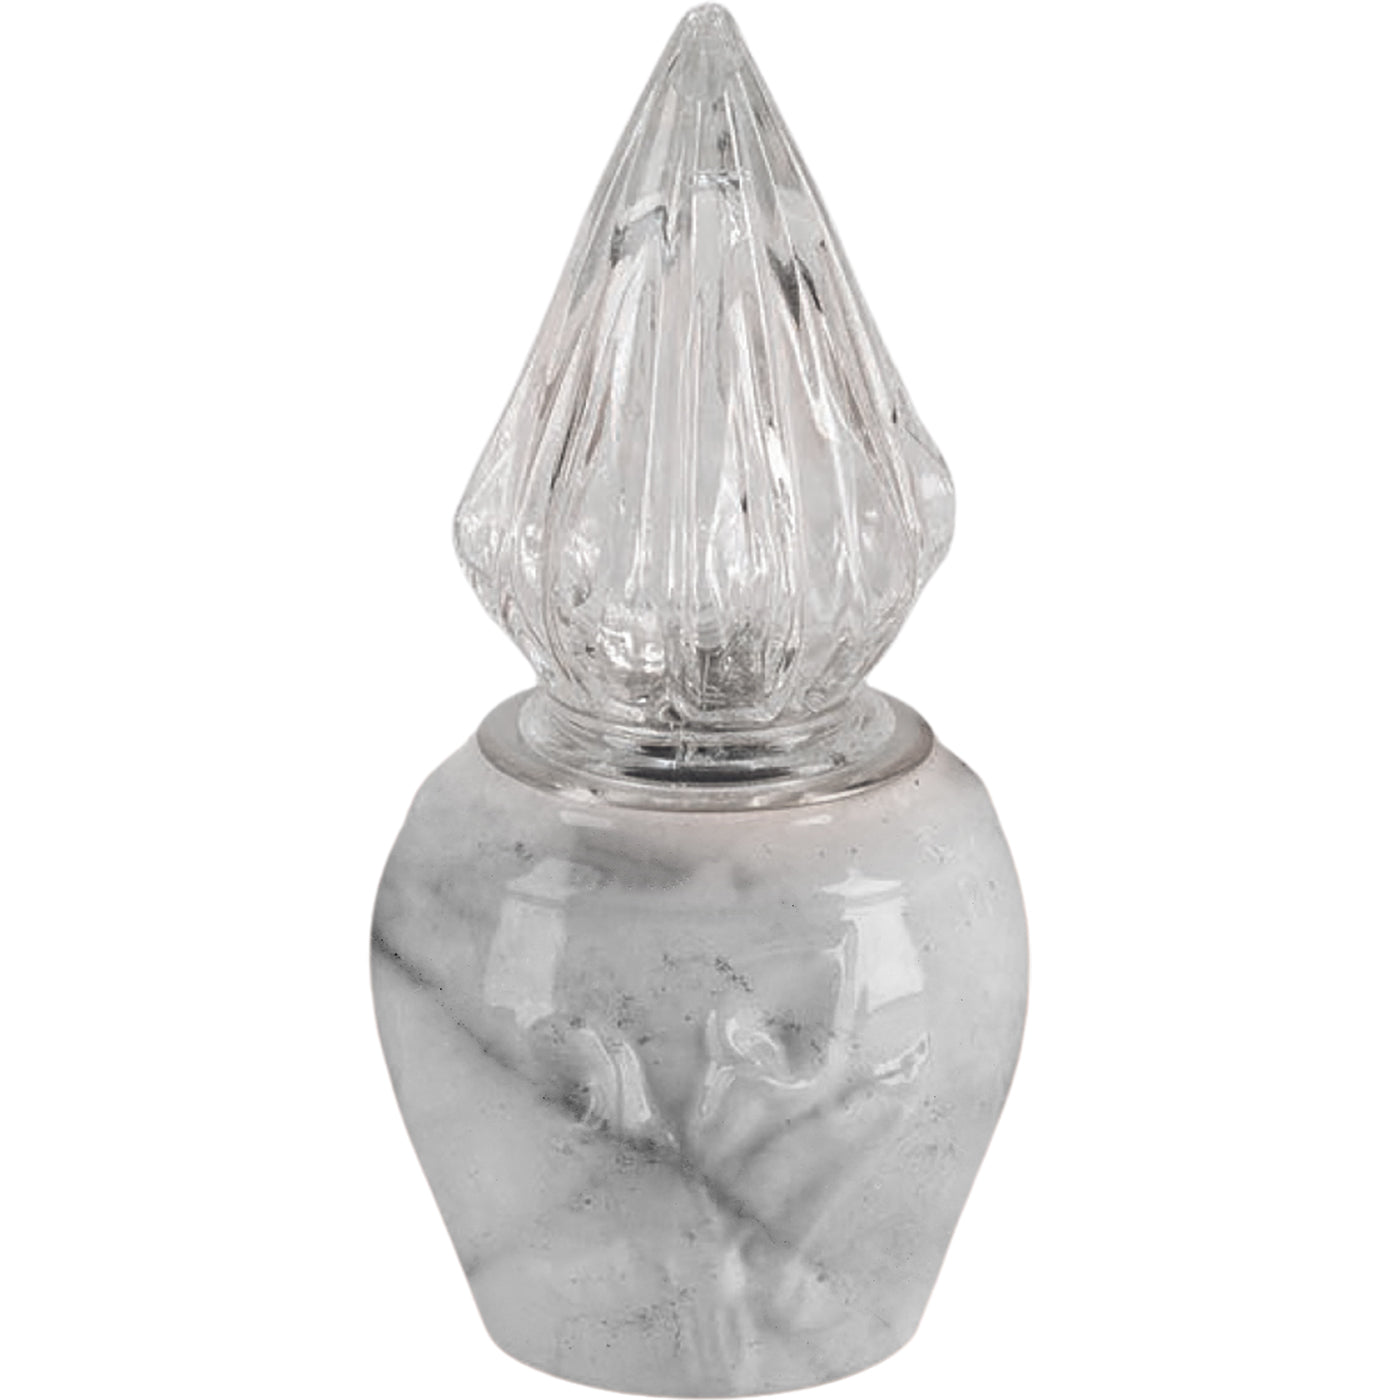 Grave light Calla carrara 10x10cm - 3.9x3.9in In white porcelain with carrara decoration, wall attached CAL164P/CARR